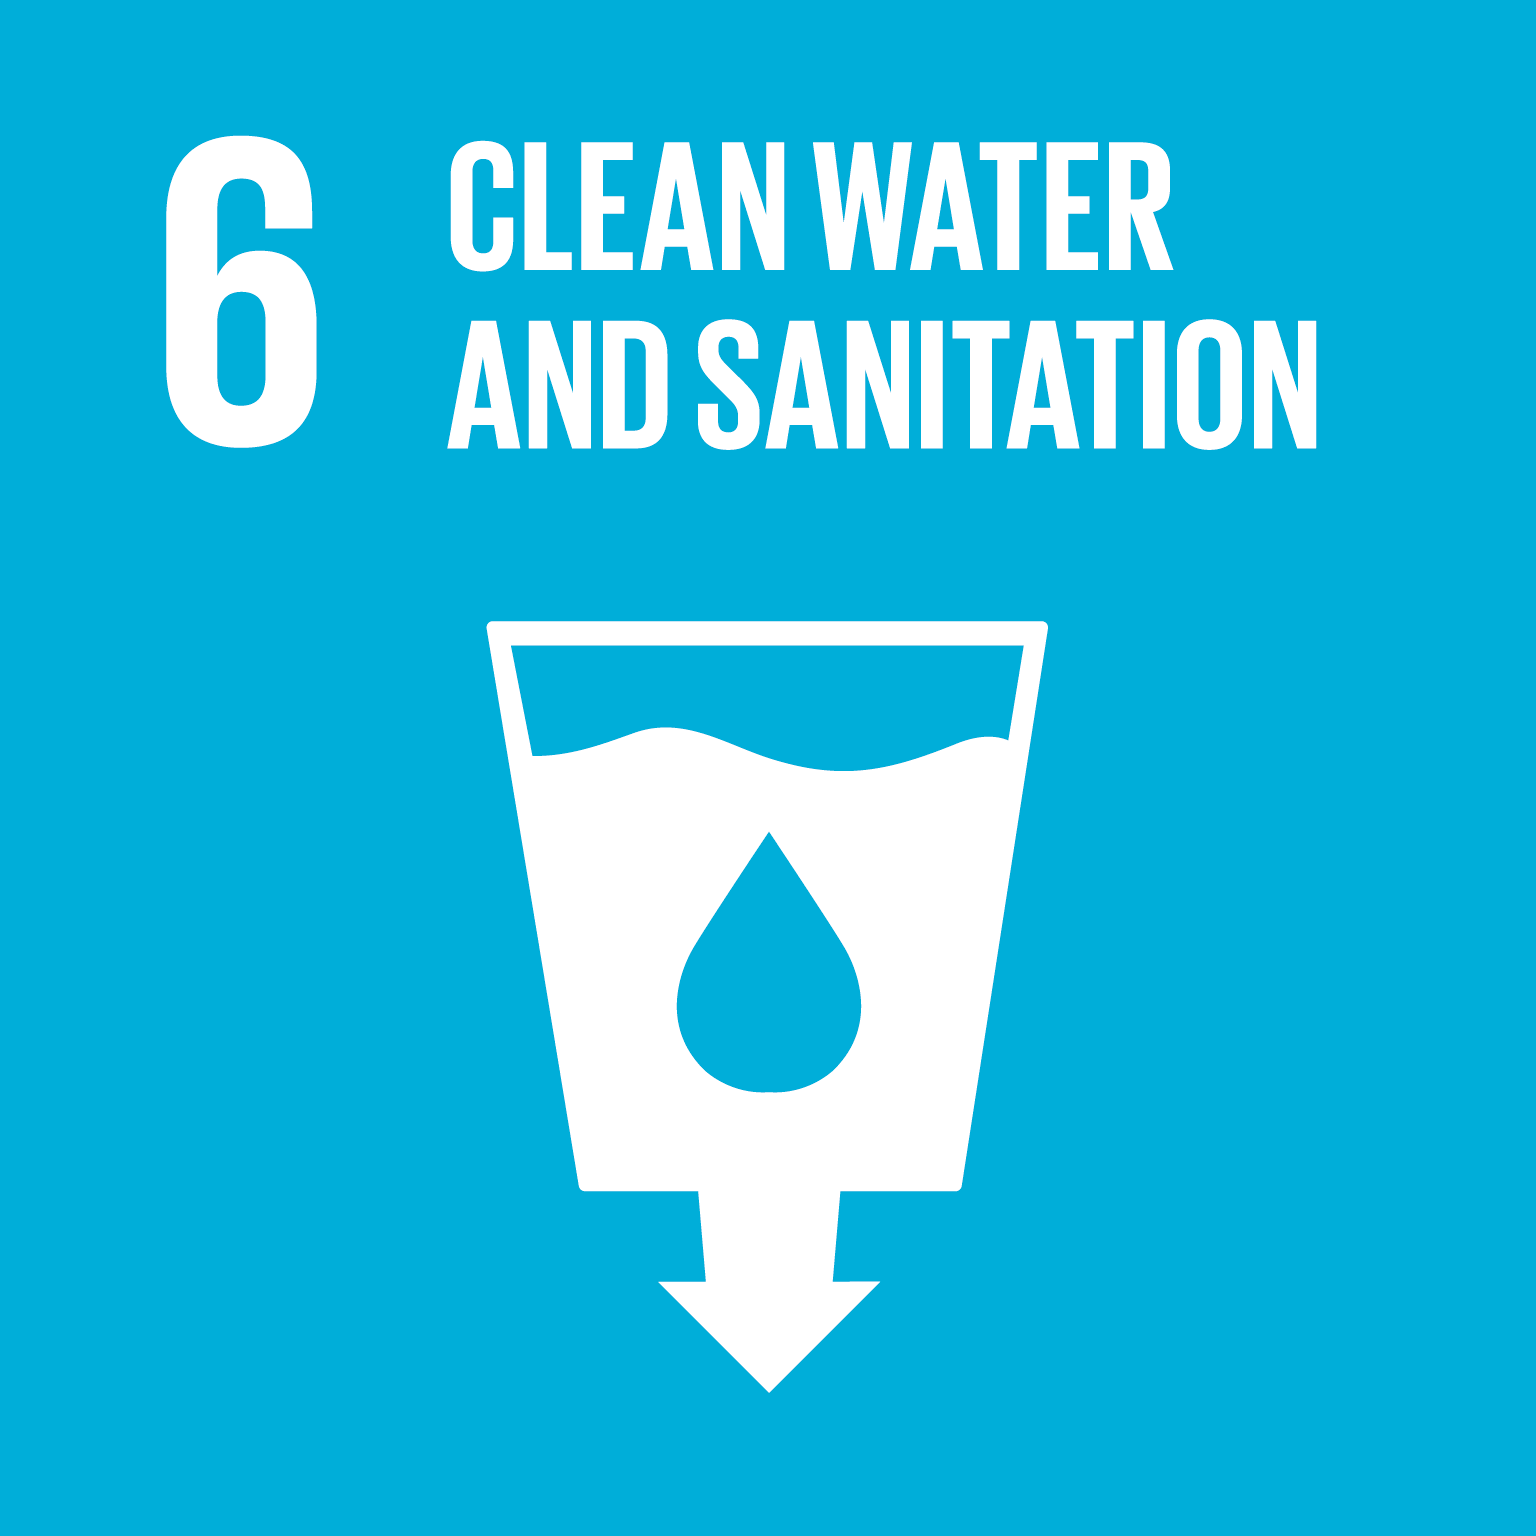 sustainable development goal 6 icon clean water and sanitation